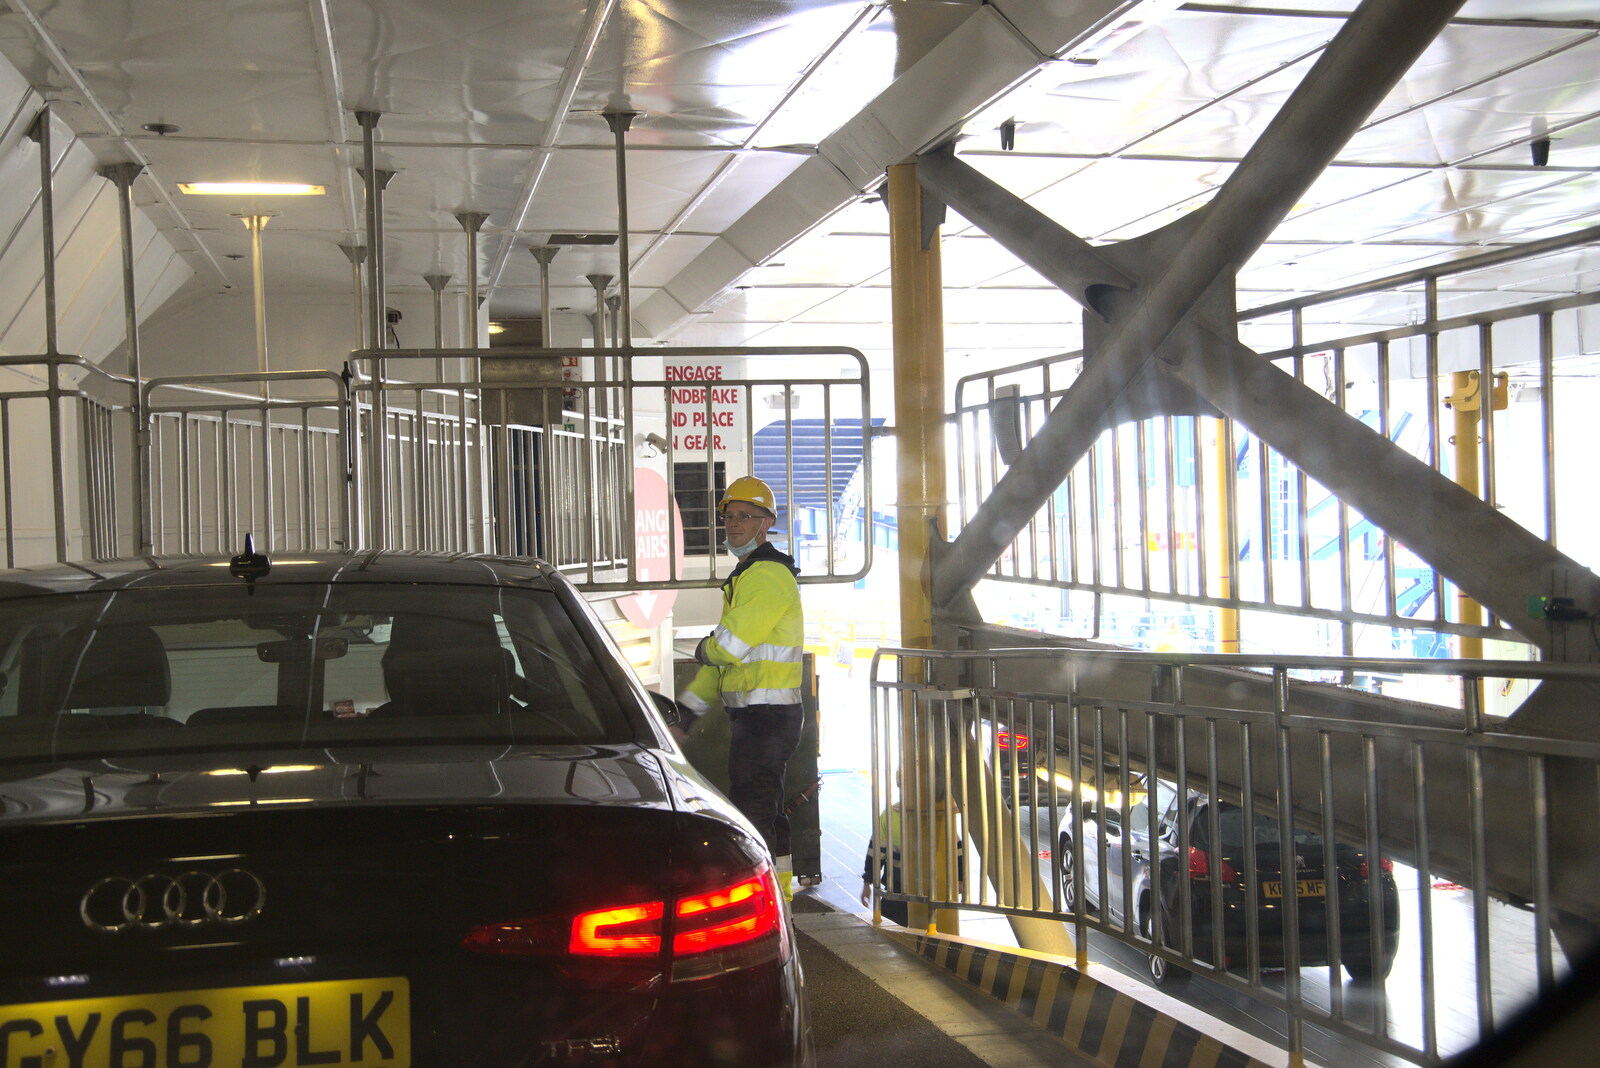 Our mezzanine car deck is lowered from The Guinness Storehouse Tour, St. James's Gate, Dublin, Ireland - 17th August 2021